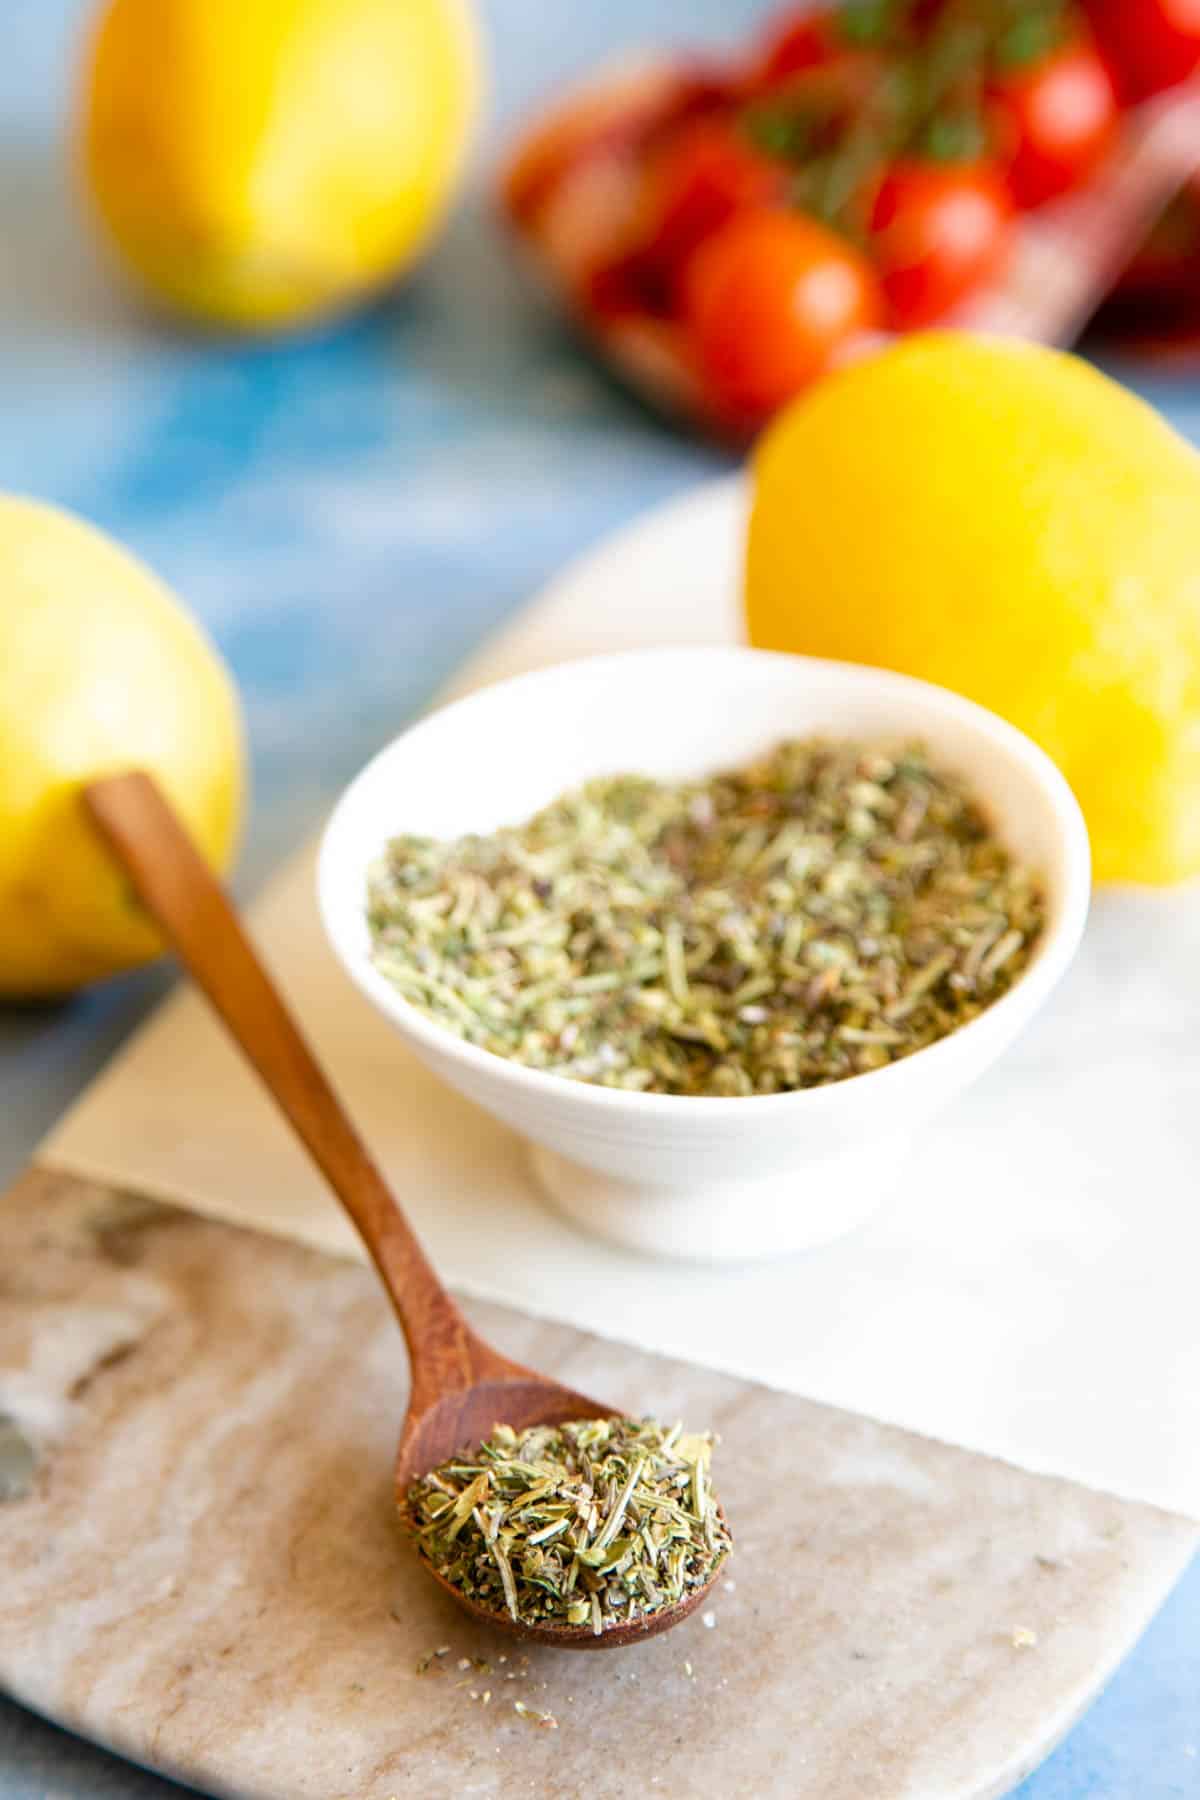 A spoonful of Greek seasoning, resting on a marble board. Bright yellow lemons in the background.